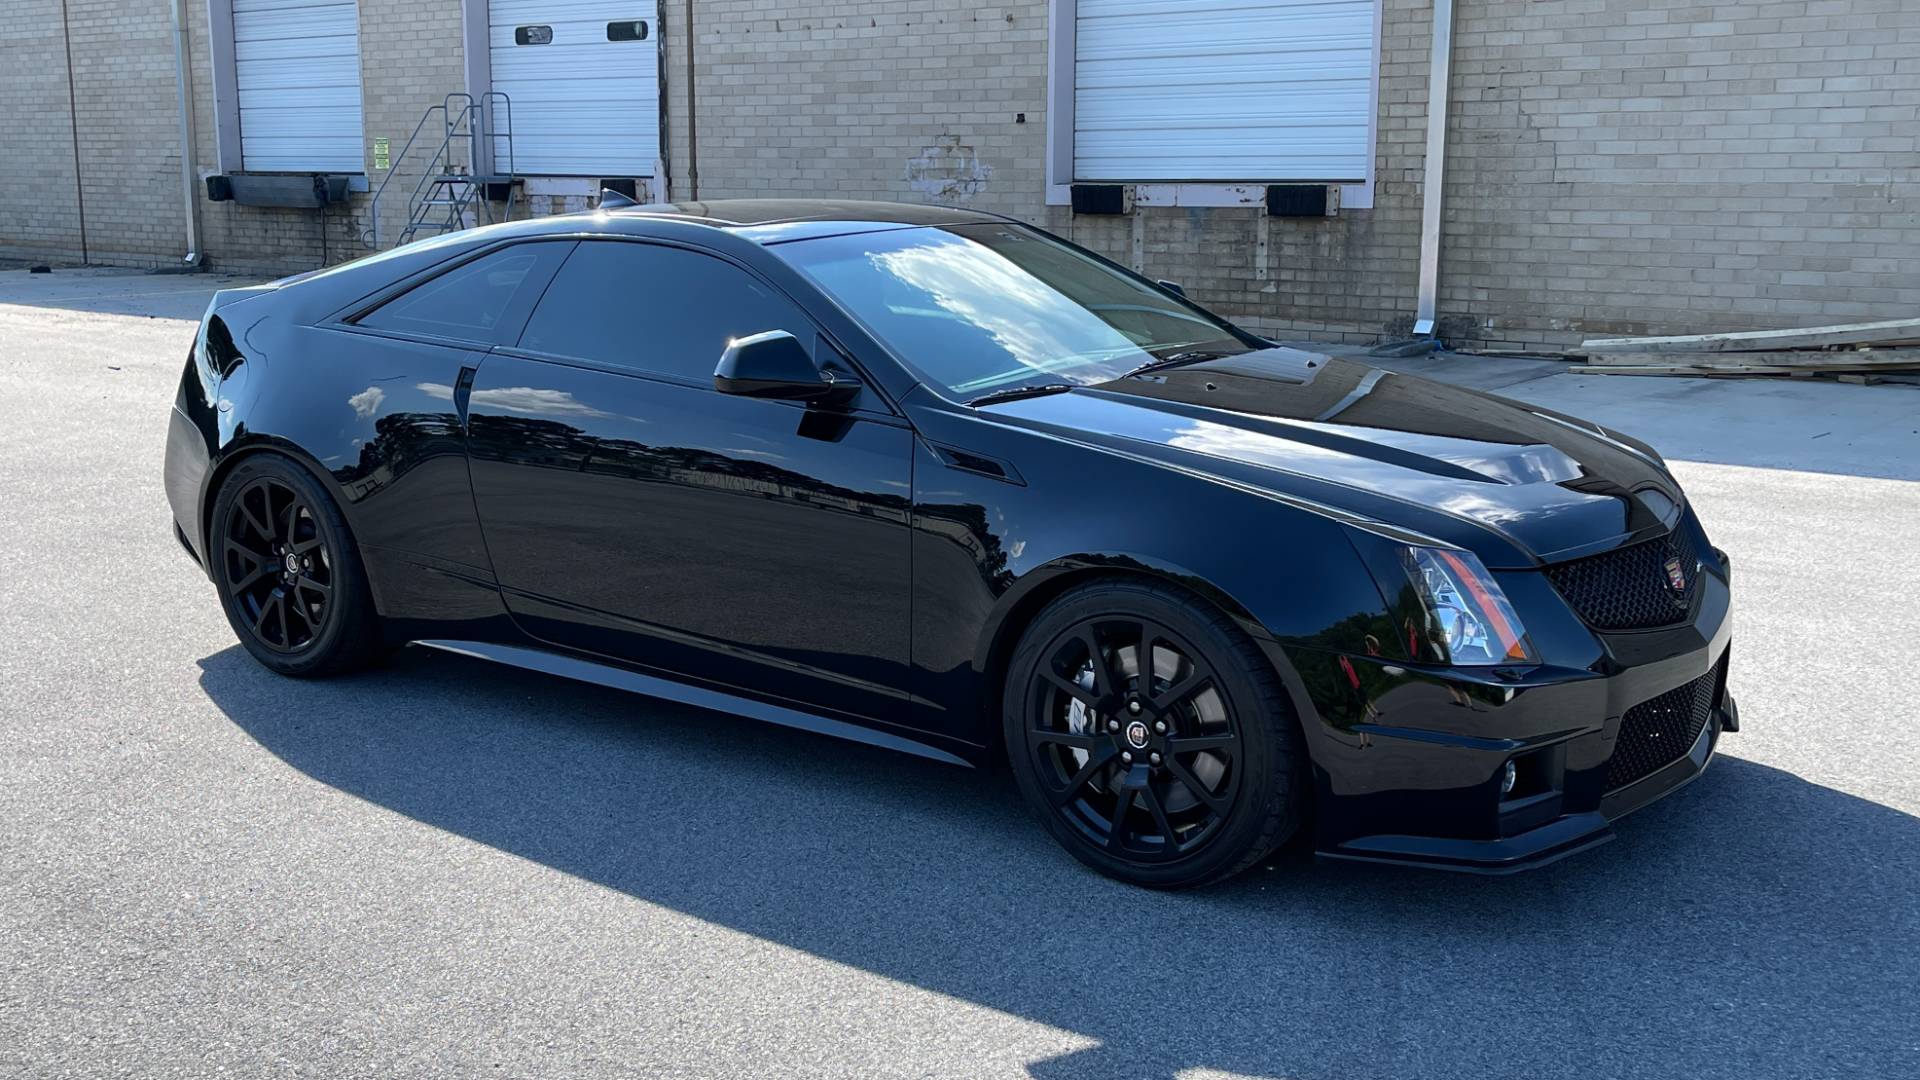 Used 2011 Cadillac CTS-V COUPE 6.2L 600HP+ / NAV / BOSE / SUNROOF / RECARO / 19IN WHLS / REARVIEW for sale Sold at Formula Imports in Charlotte NC 28227 9